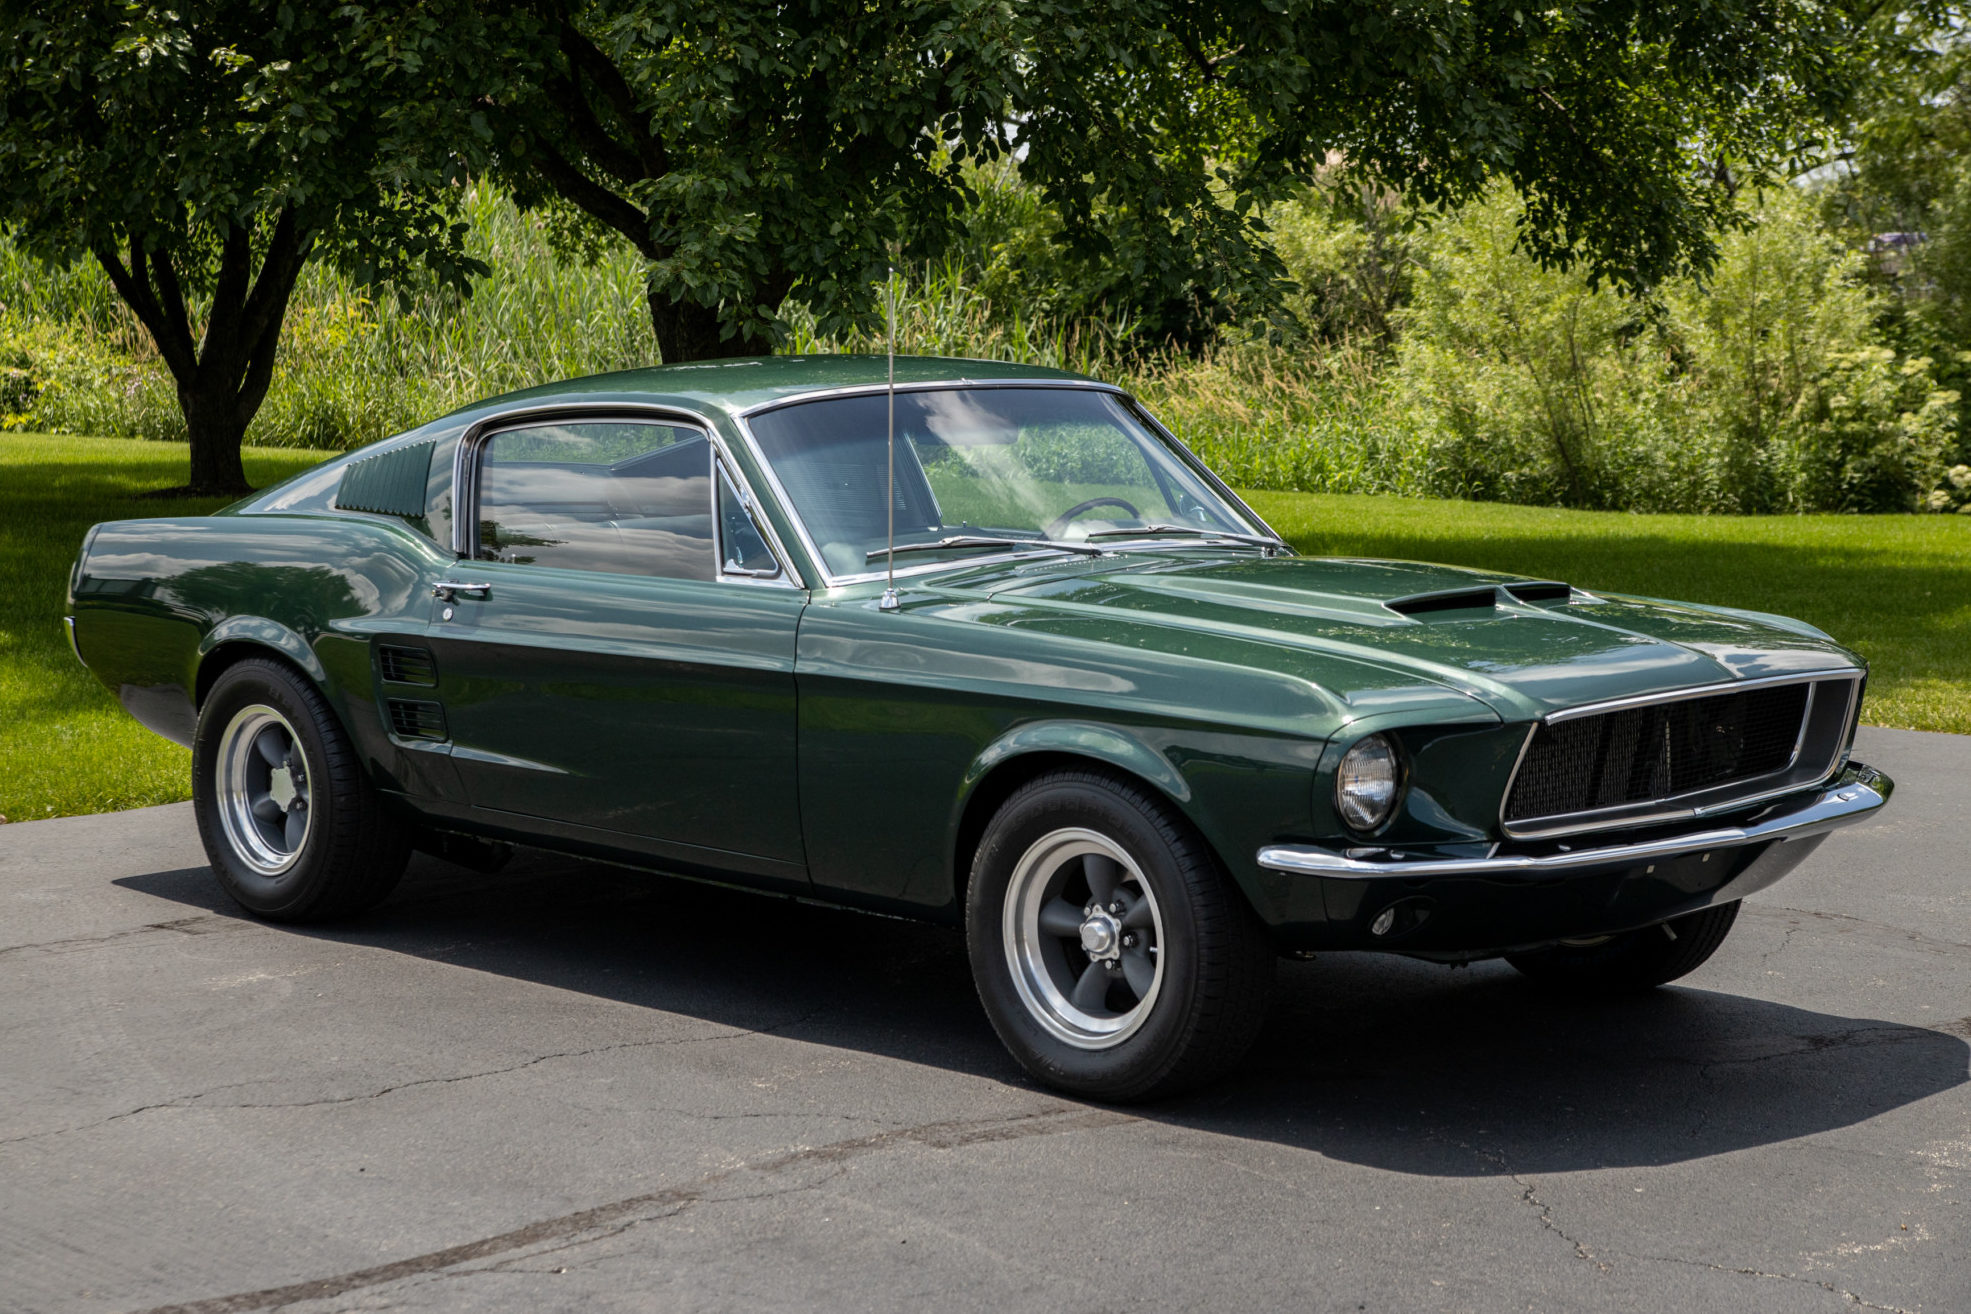 Emerald Green 1967 Ford Mustang